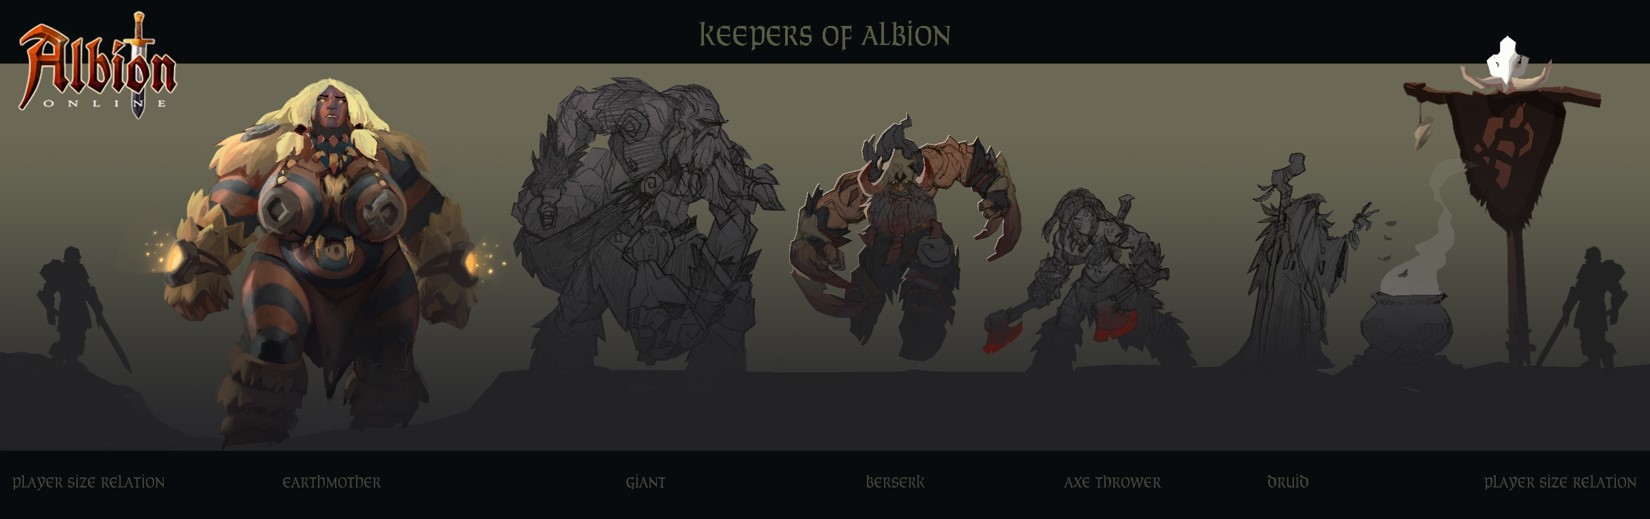 Keeper Faction - Albion Online Wiki